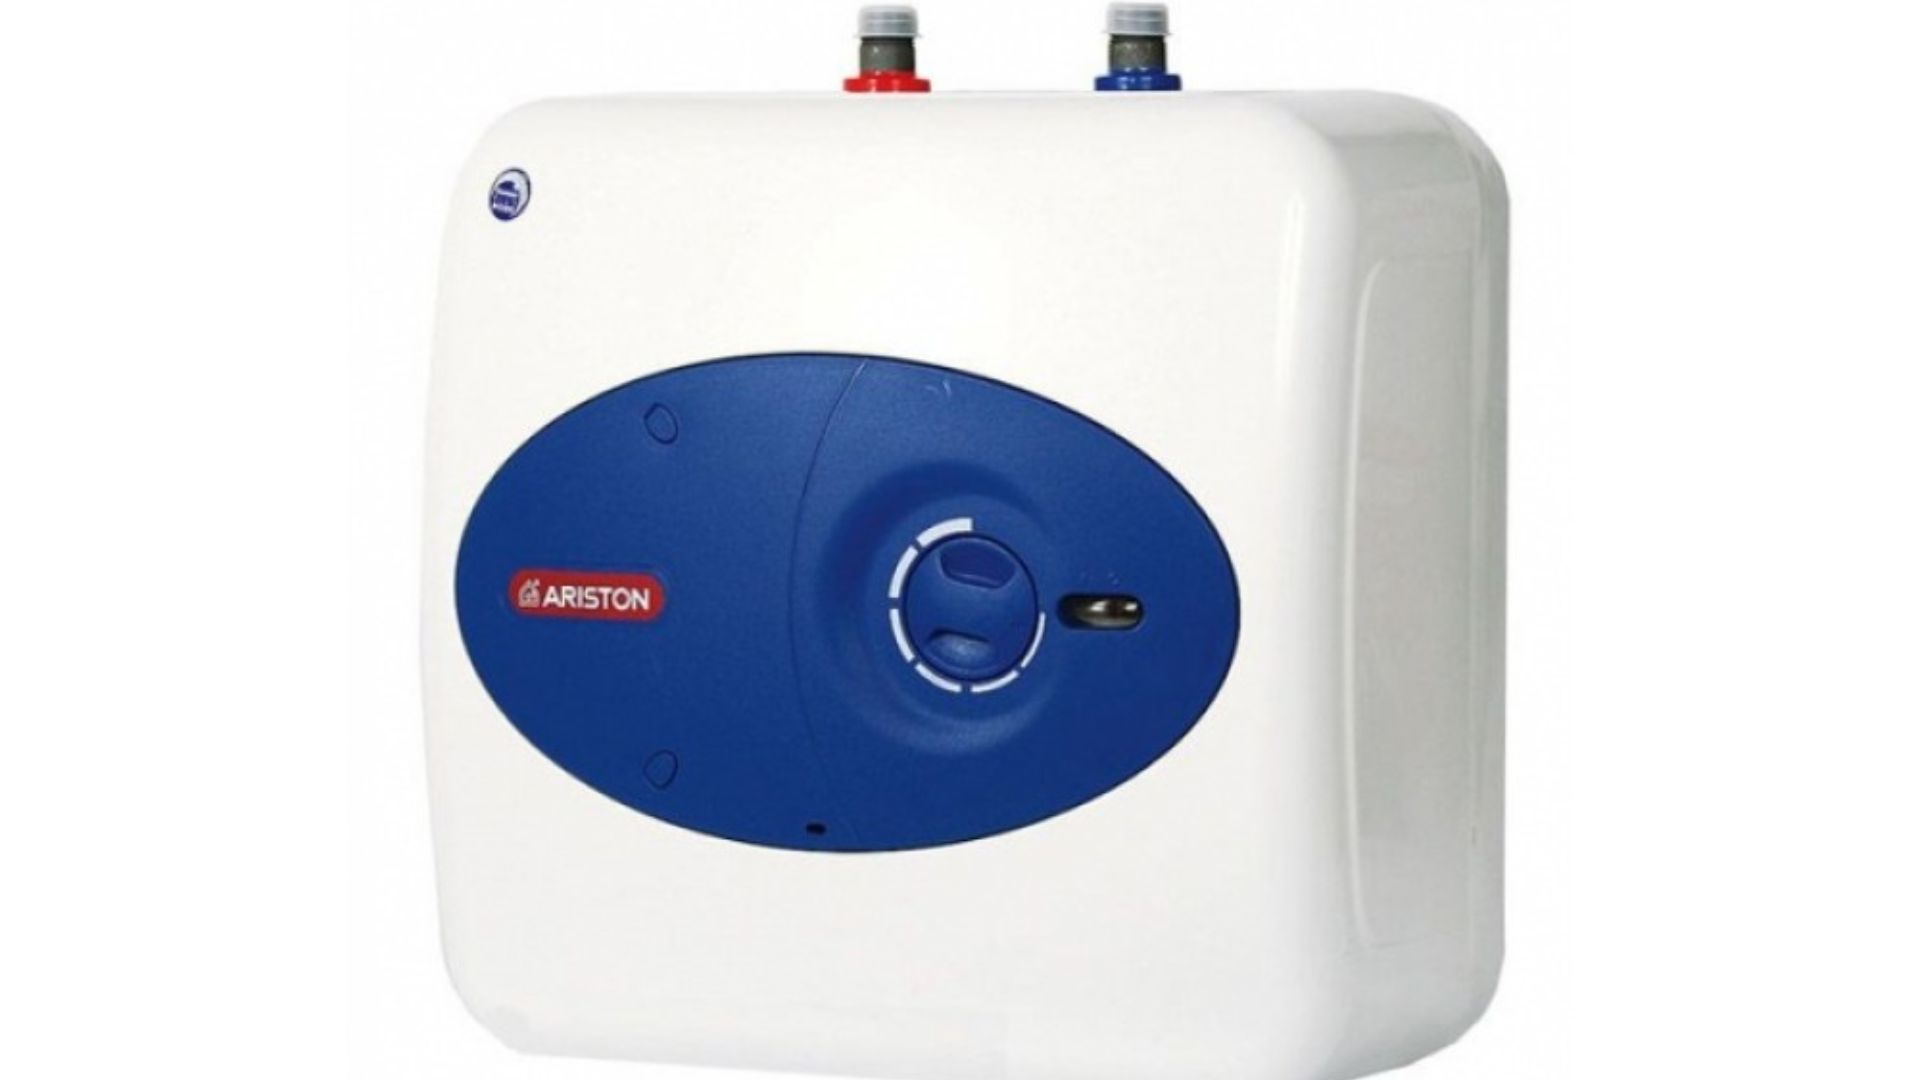 Exploring the Technology Behind Ariston Water Heaters